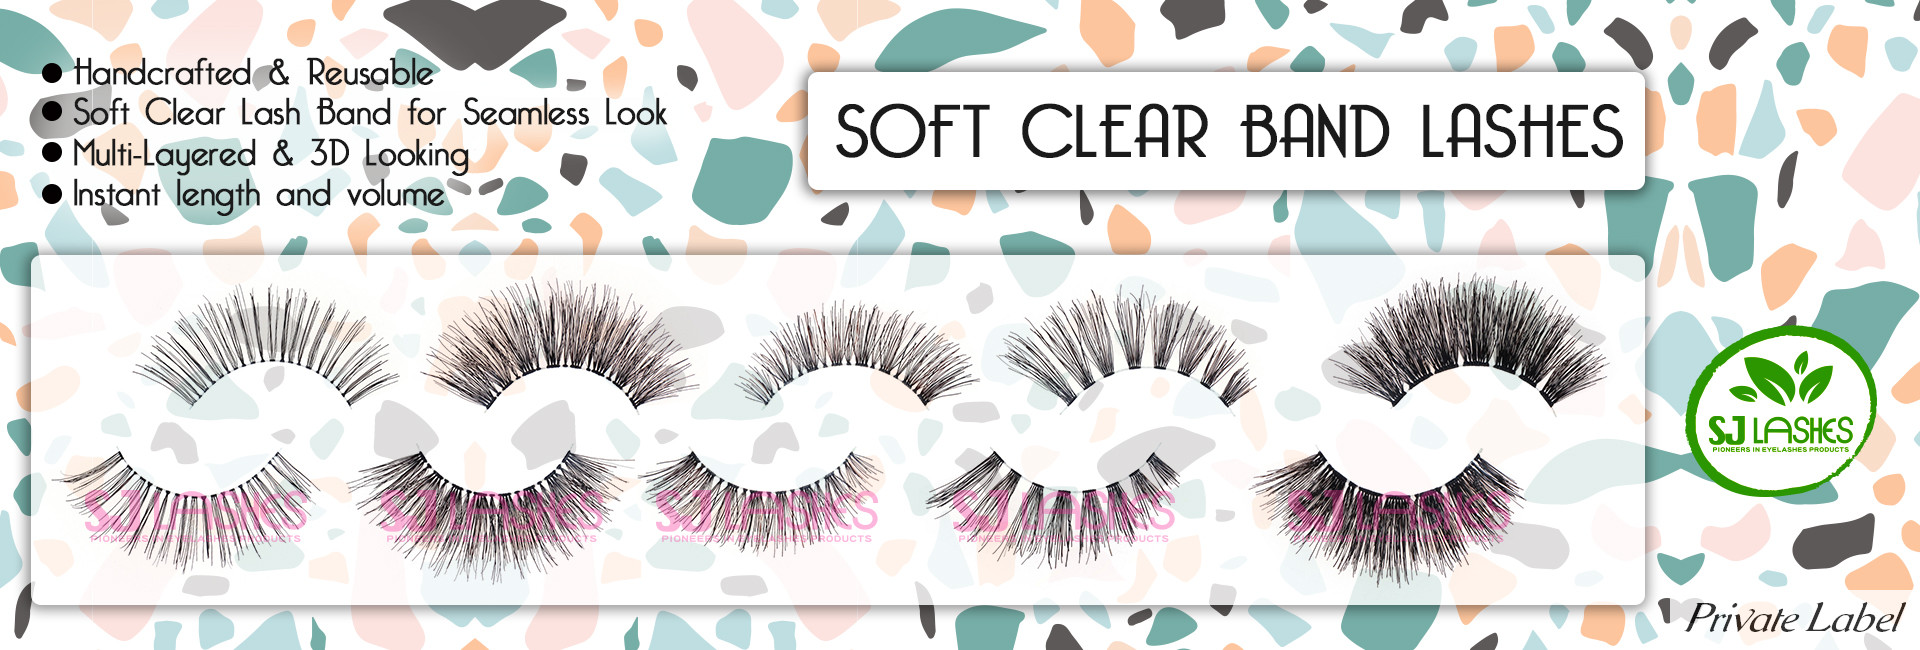 Soft Clear Band Lashes